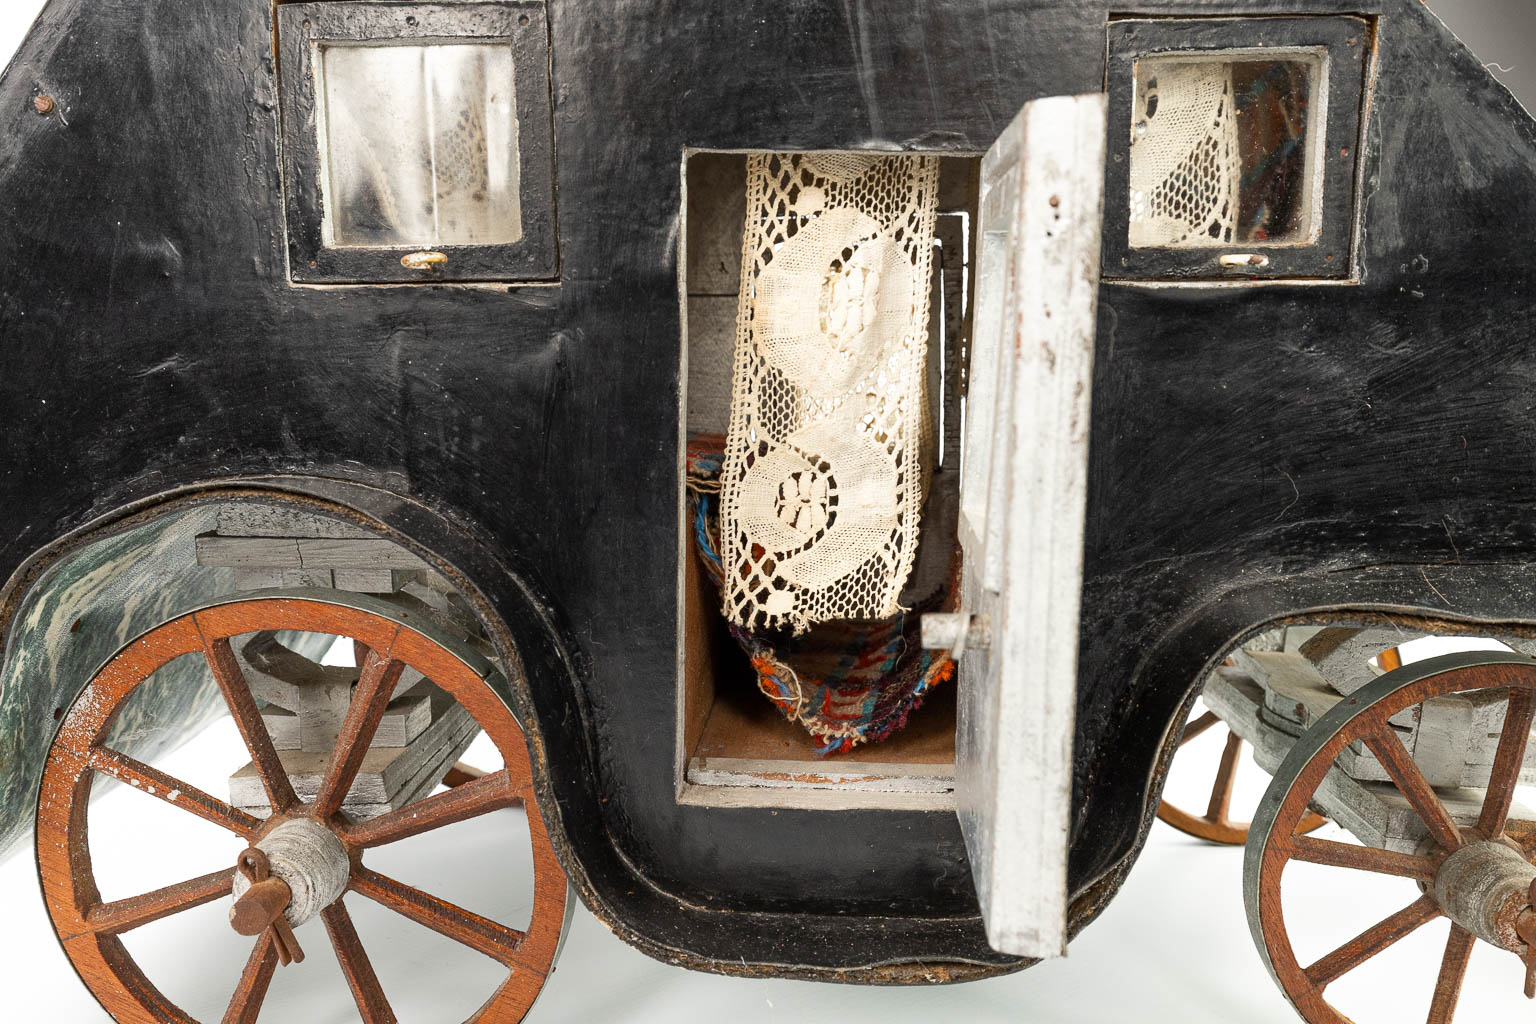 A miniature horse drawn carriage, made of wood. (H:39cm)